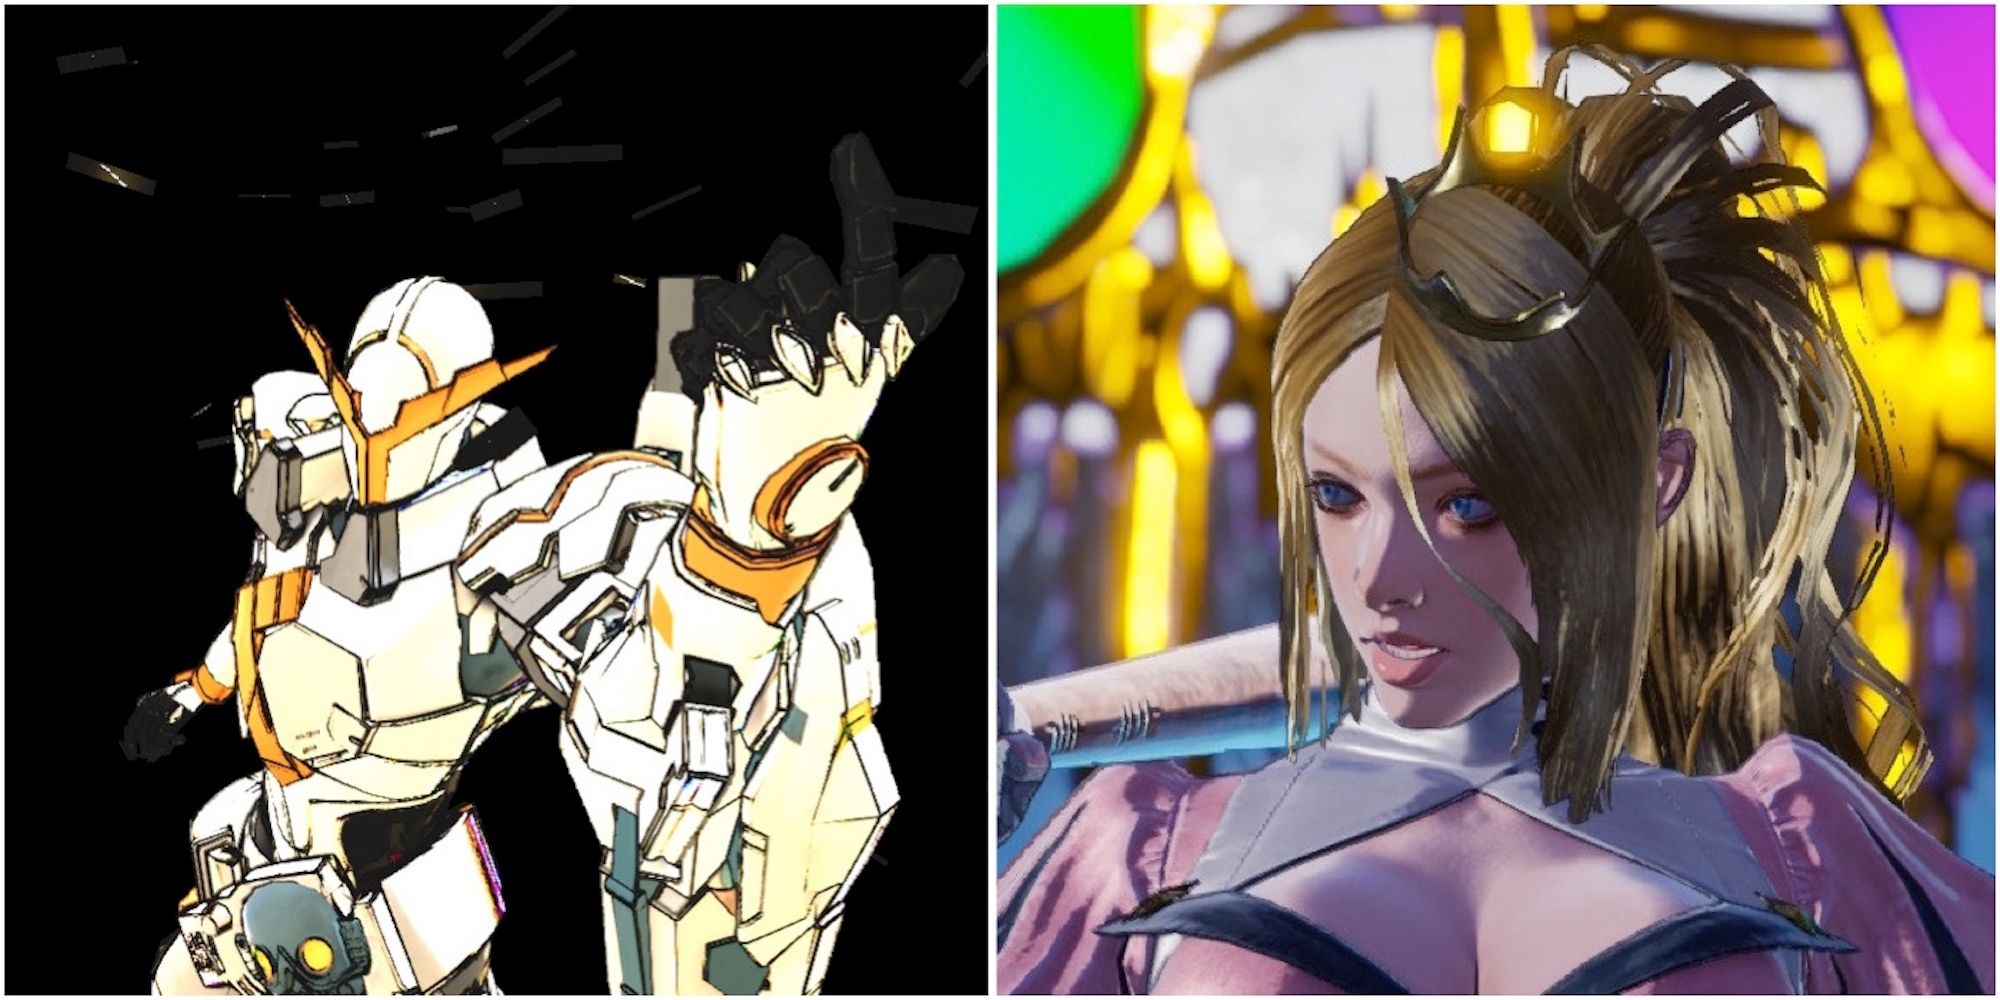 Travis and Charlotte from No More Heroes III